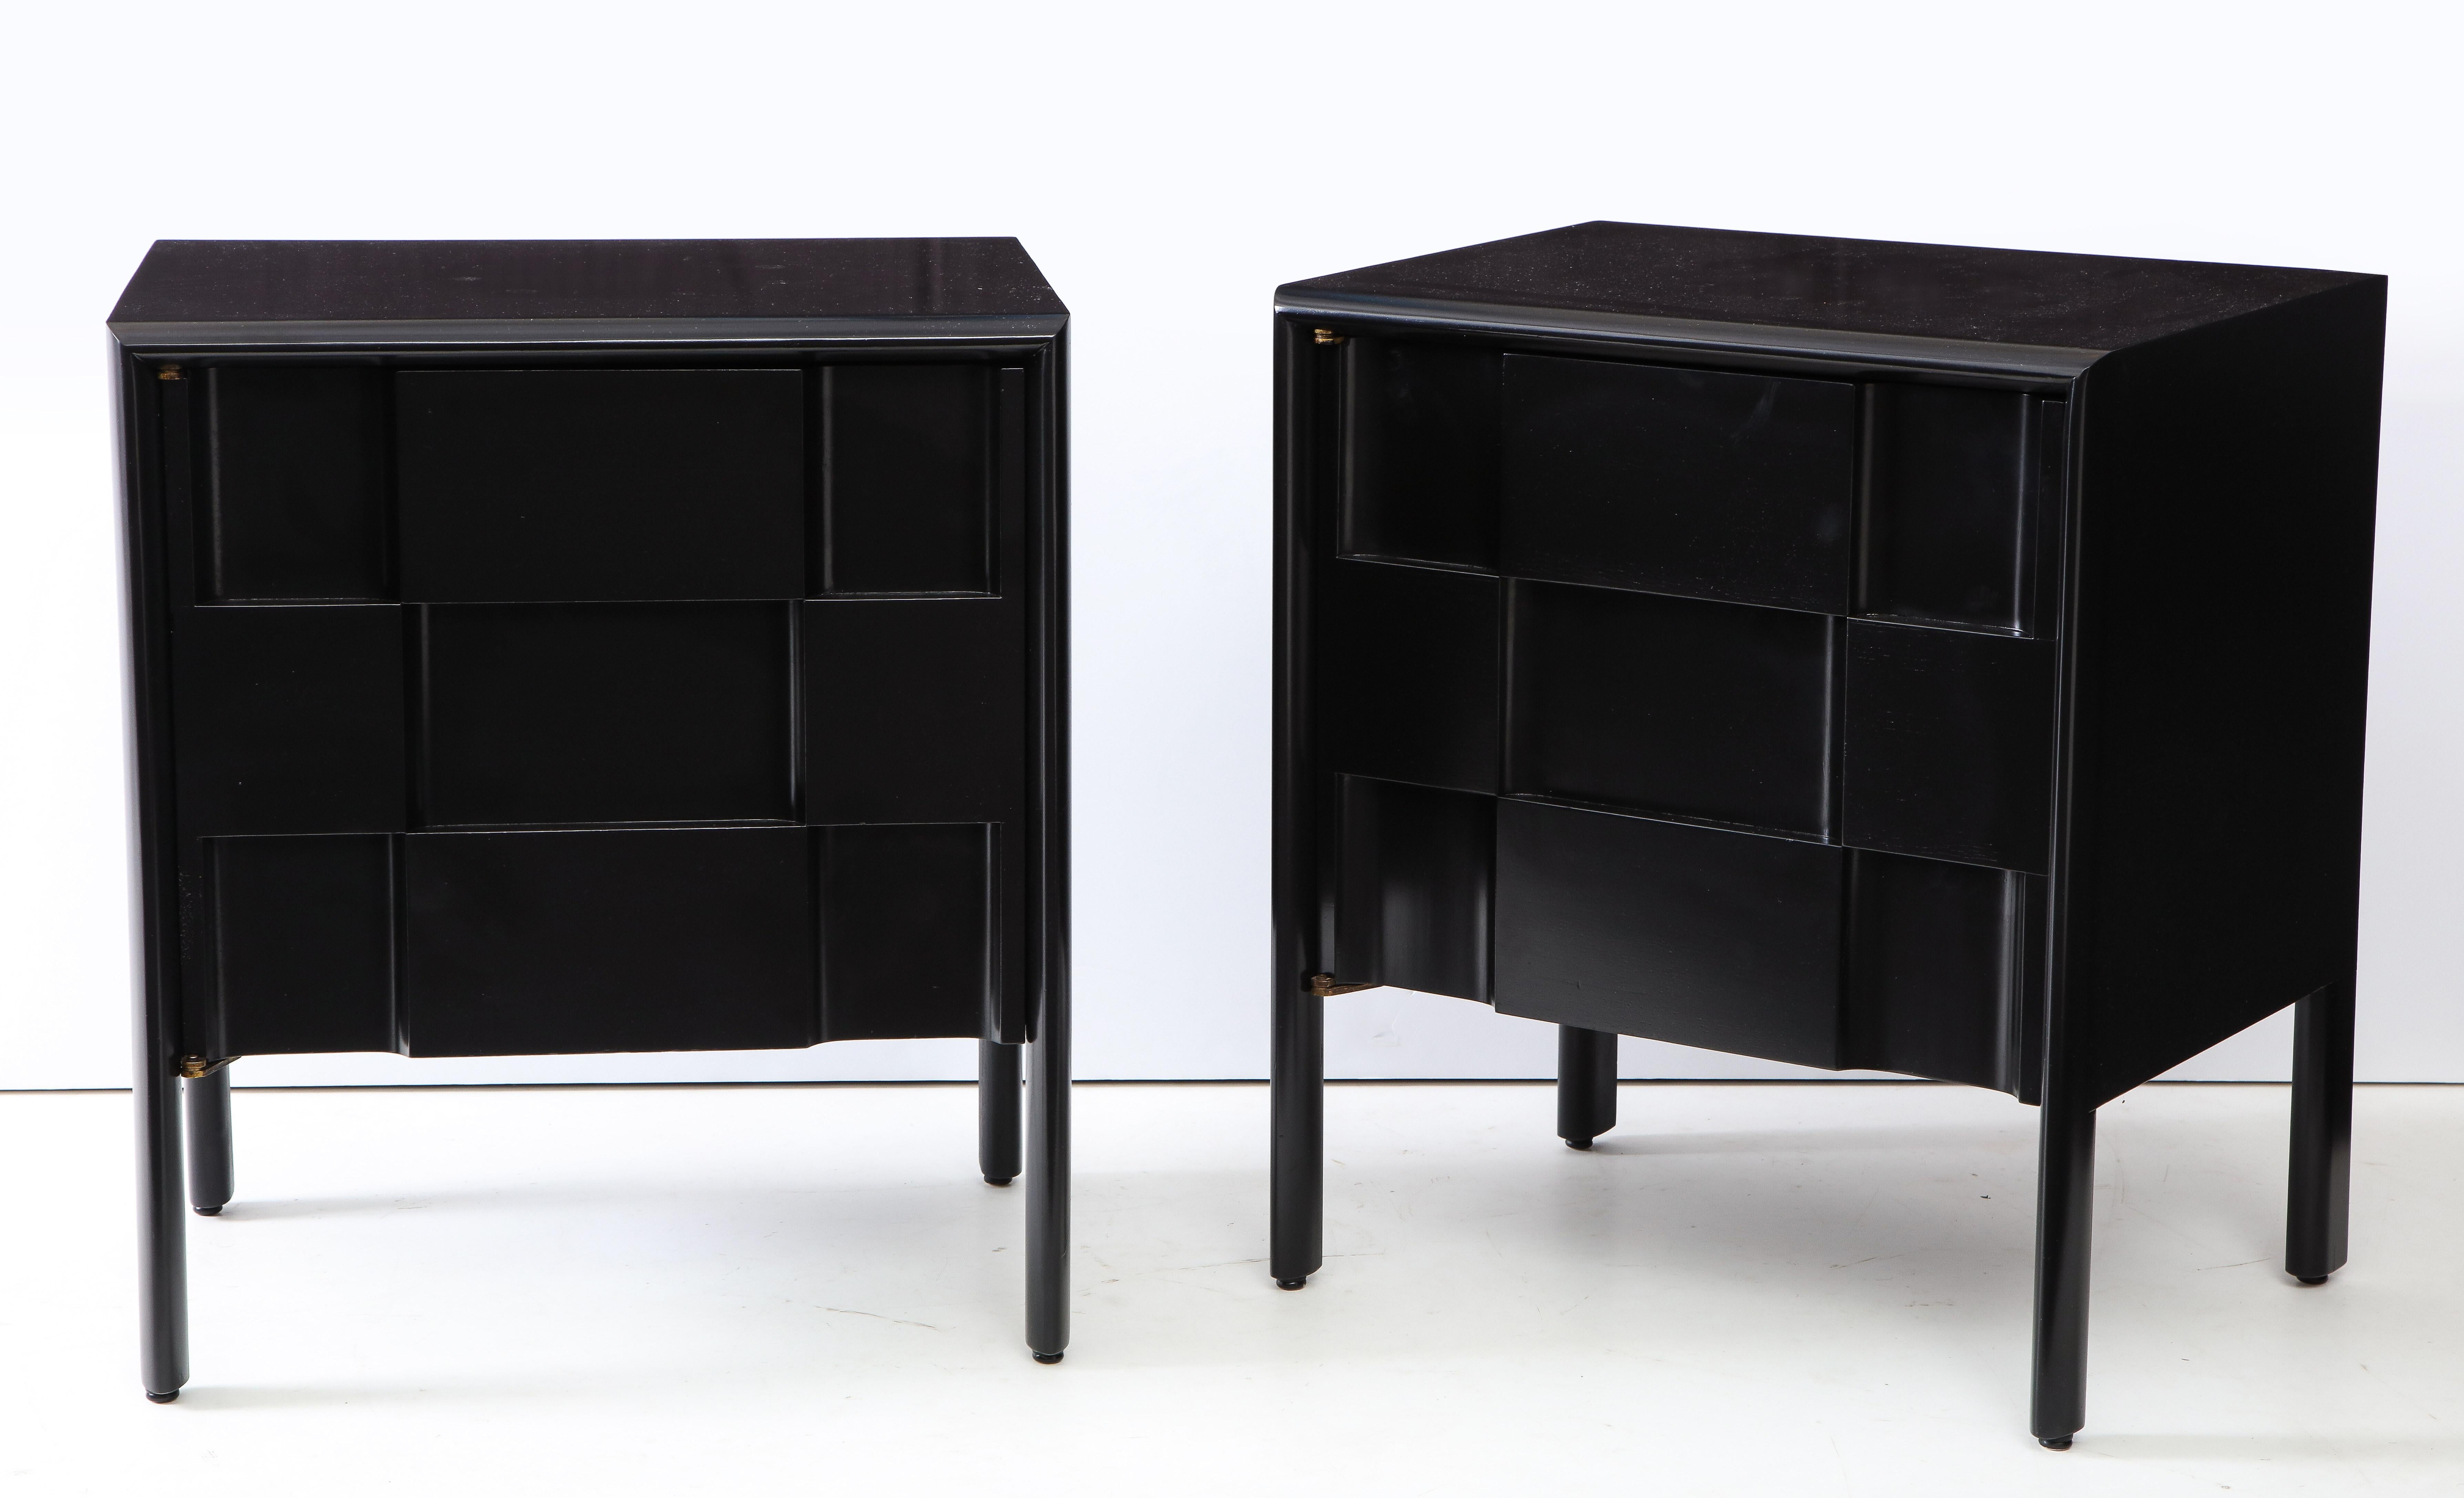 1960s Edmond J Spence checkerboard night stands. Newly refinished in black lacquer.